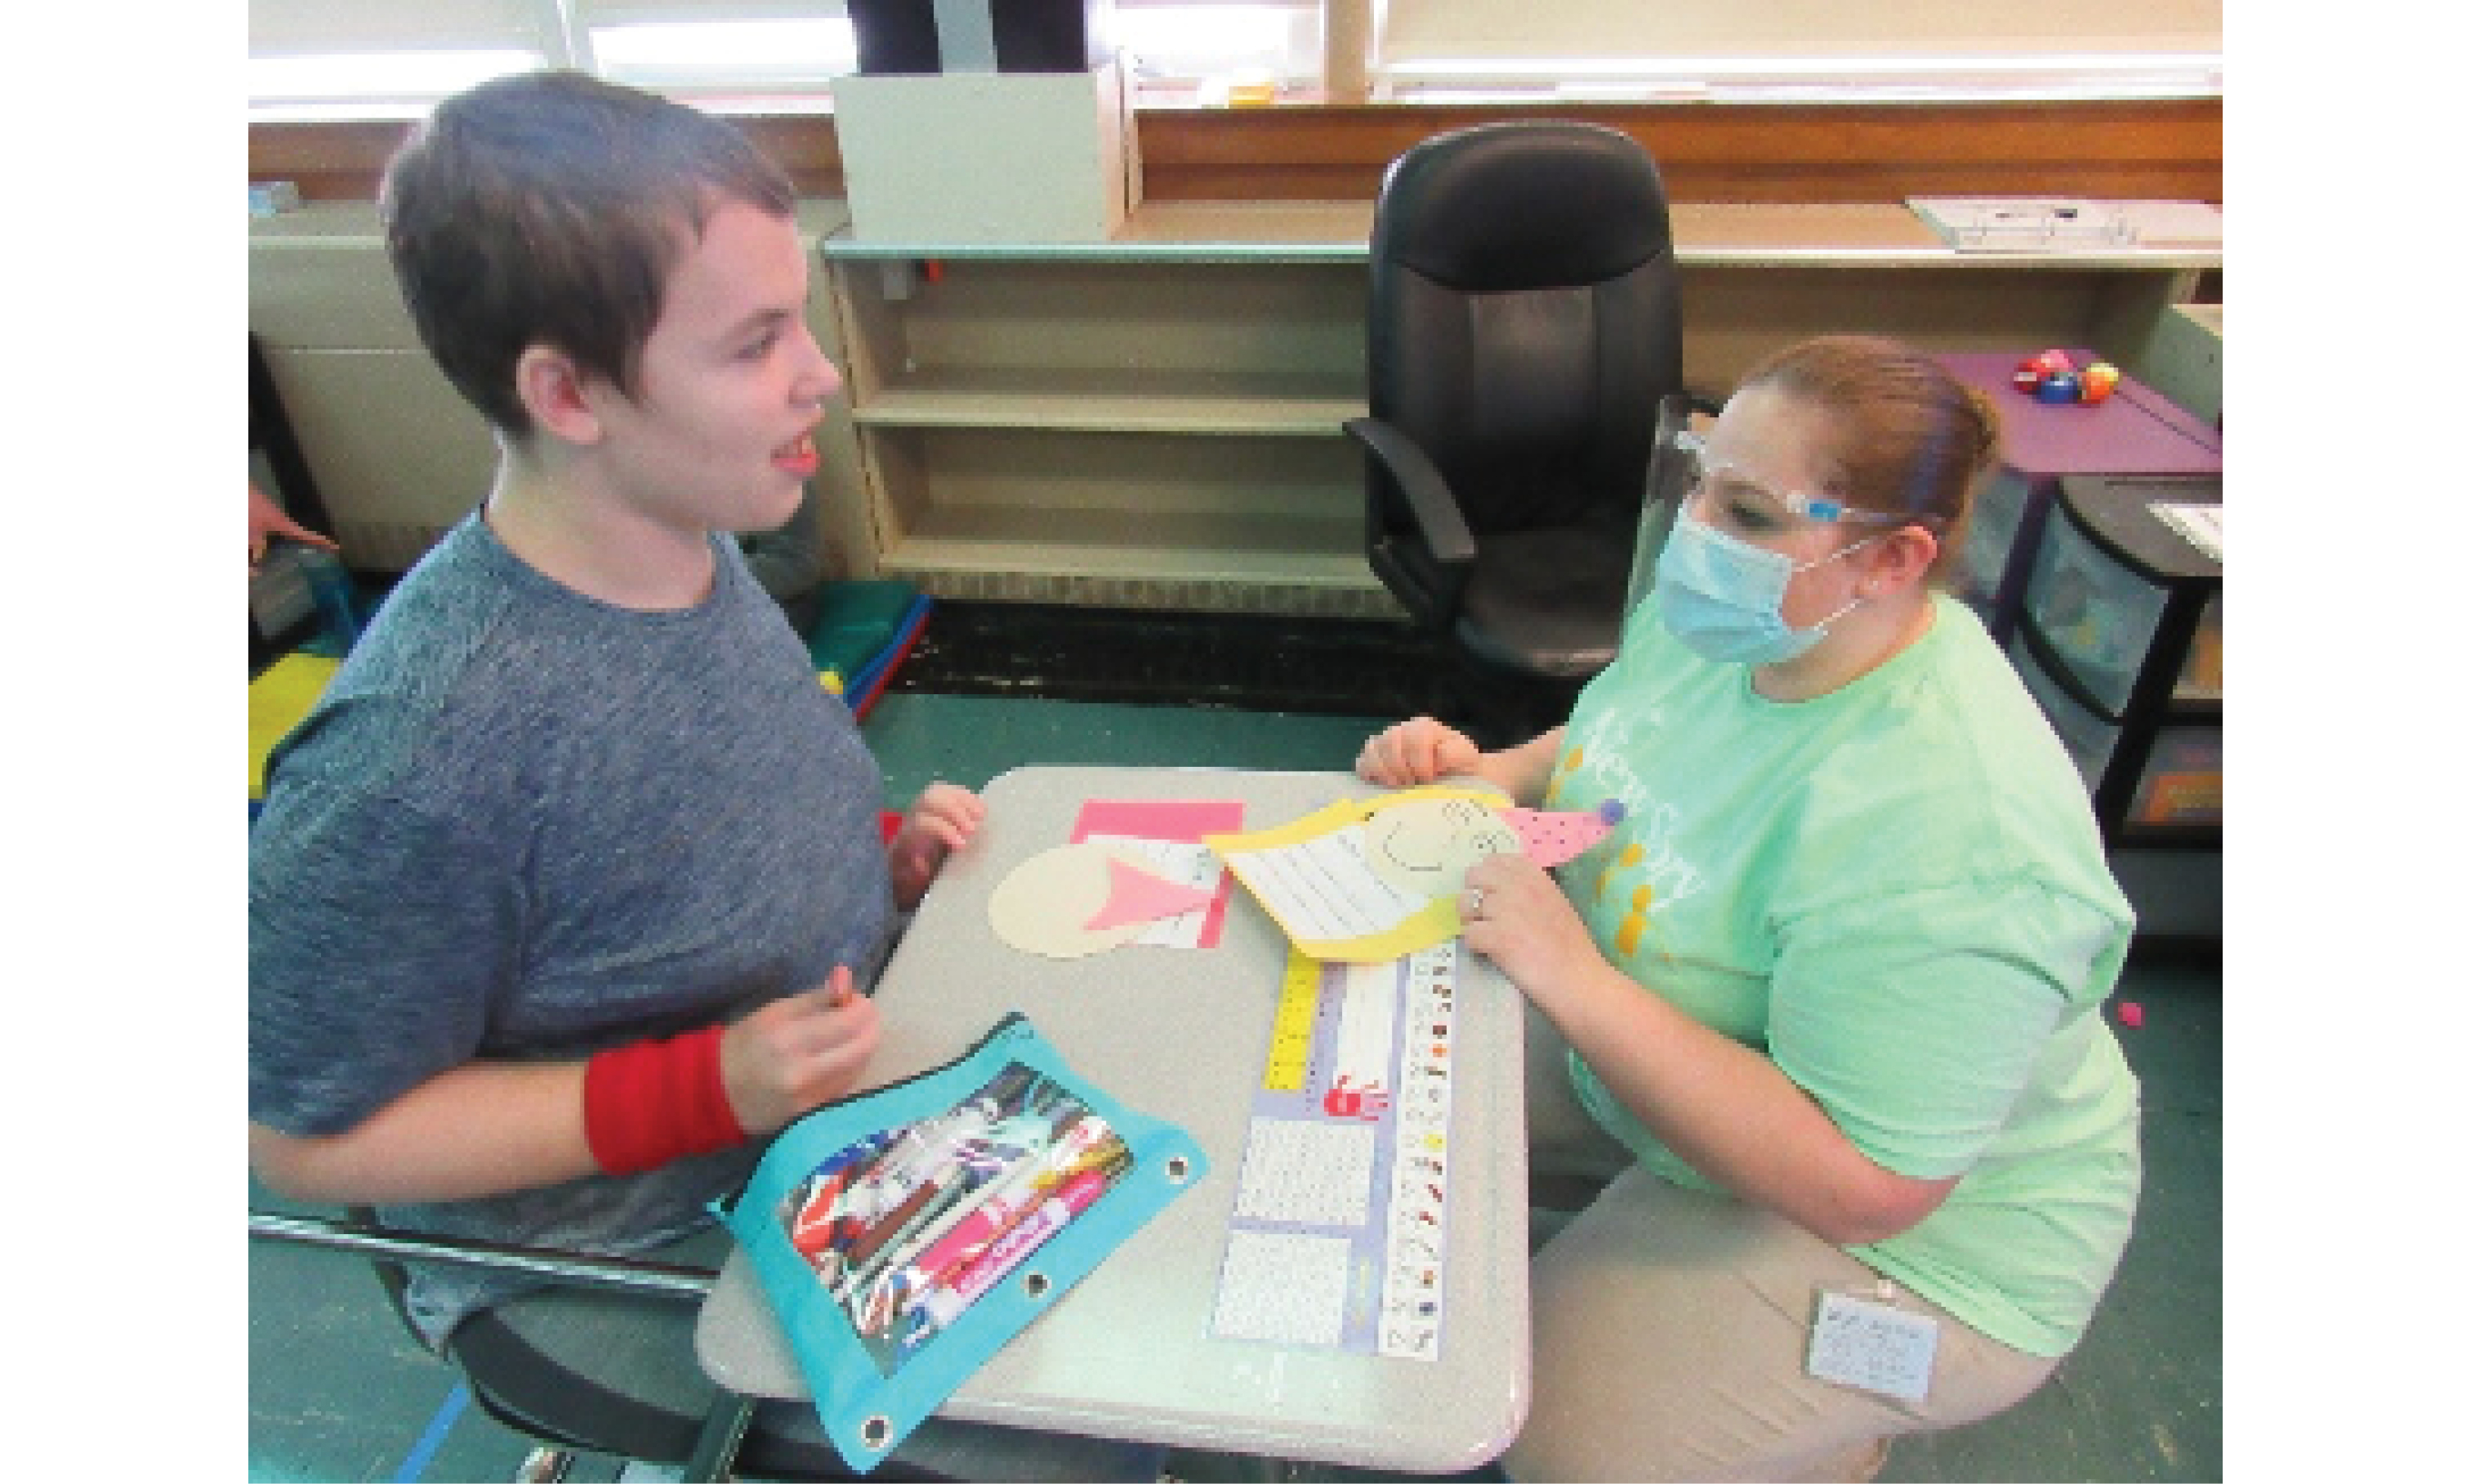 Student and Teacher work on New Year's Resolutions craft together